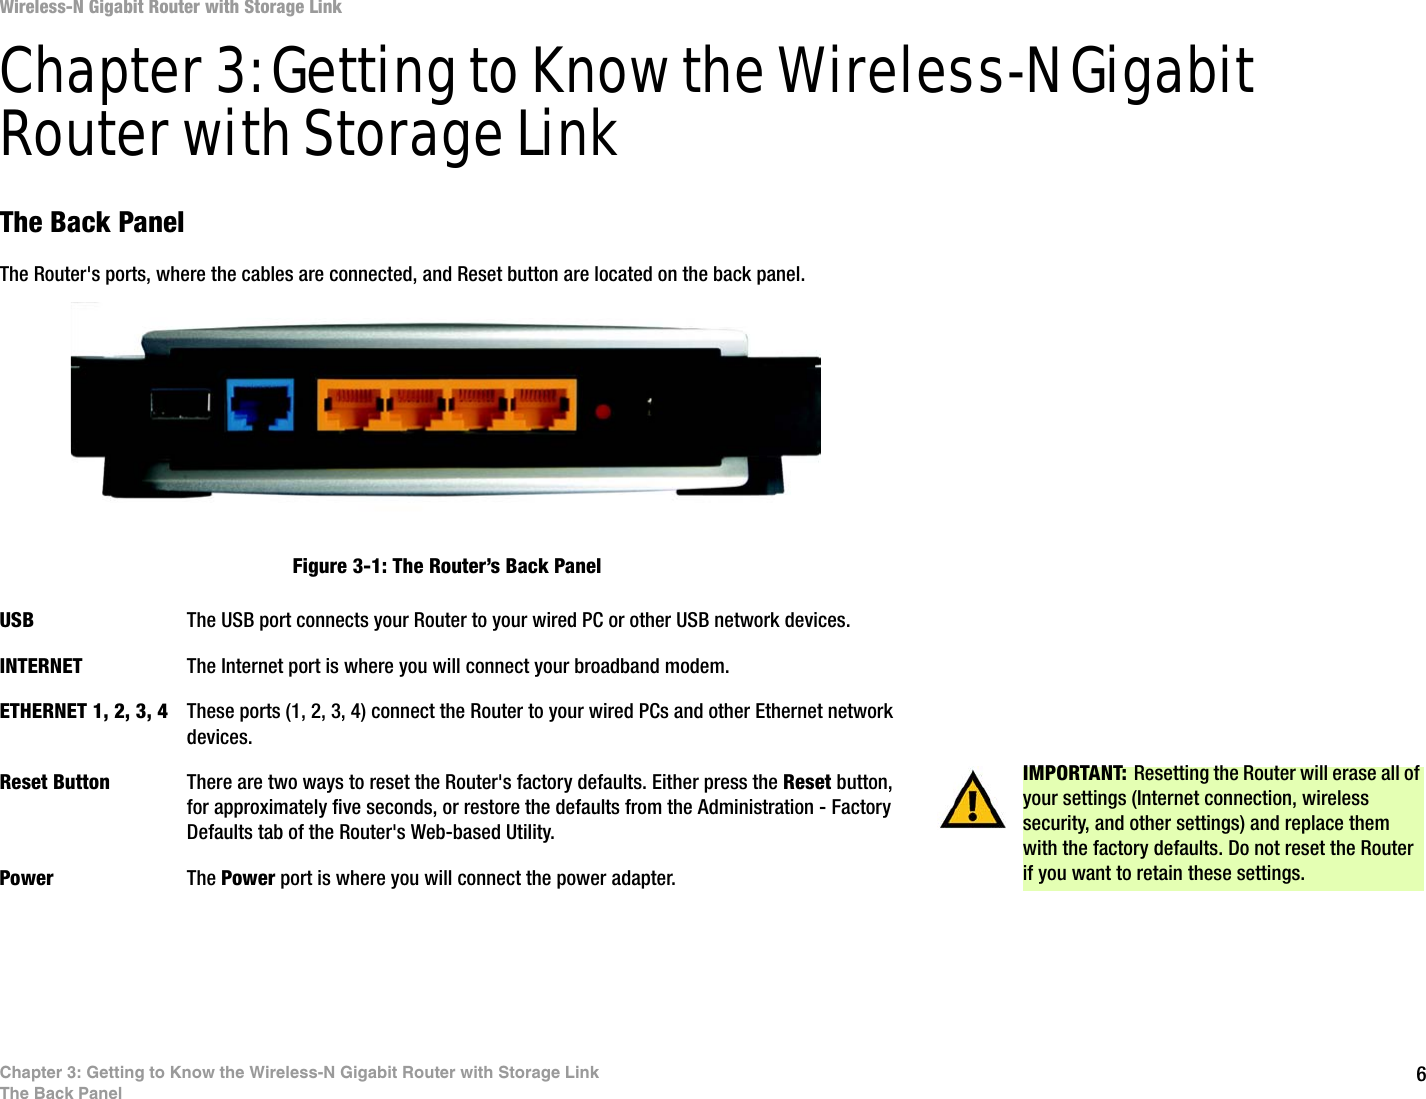 6Chapter 3: Getting to Know the Wireless-N Gigabit Router with Storage LinkThe Back PanelWireless-N Gigabit Router with Storage LinkChapter 3: Getting to Know the Wireless-N Gigabit Router with Storage LinkThe Back PanelThe Router&apos;s ports, where the cables are connected, and Reset button are located on the back panel.USB The USB port connects your Router to your wired PC or other USB network devices. INTERNET The Internet port is where you will connect your broadband modem.ETHERNET 1, 2, 3, 4 These ports (1, 2, 3, 4) connect the Router to your wired PCs and other Ethernet network devices.Reset Button There are two ways to reset the Router&apos;s factory defaults. Either press the Reset button, for approximately five seconds, or restore the defaults from the Administration - Factory Defaults tab of the Router&apos;s Web-based Utility.Power The Power port is where you will connect the power adapter.IMPORTANT: Resetting the Router will erase all of your settings (Internet connection, wireless security, and other settings) and replace them with the factory defaults. Do not reset the Router if you want to retain these settings.Figure 3-1: The Router’s Back Panel